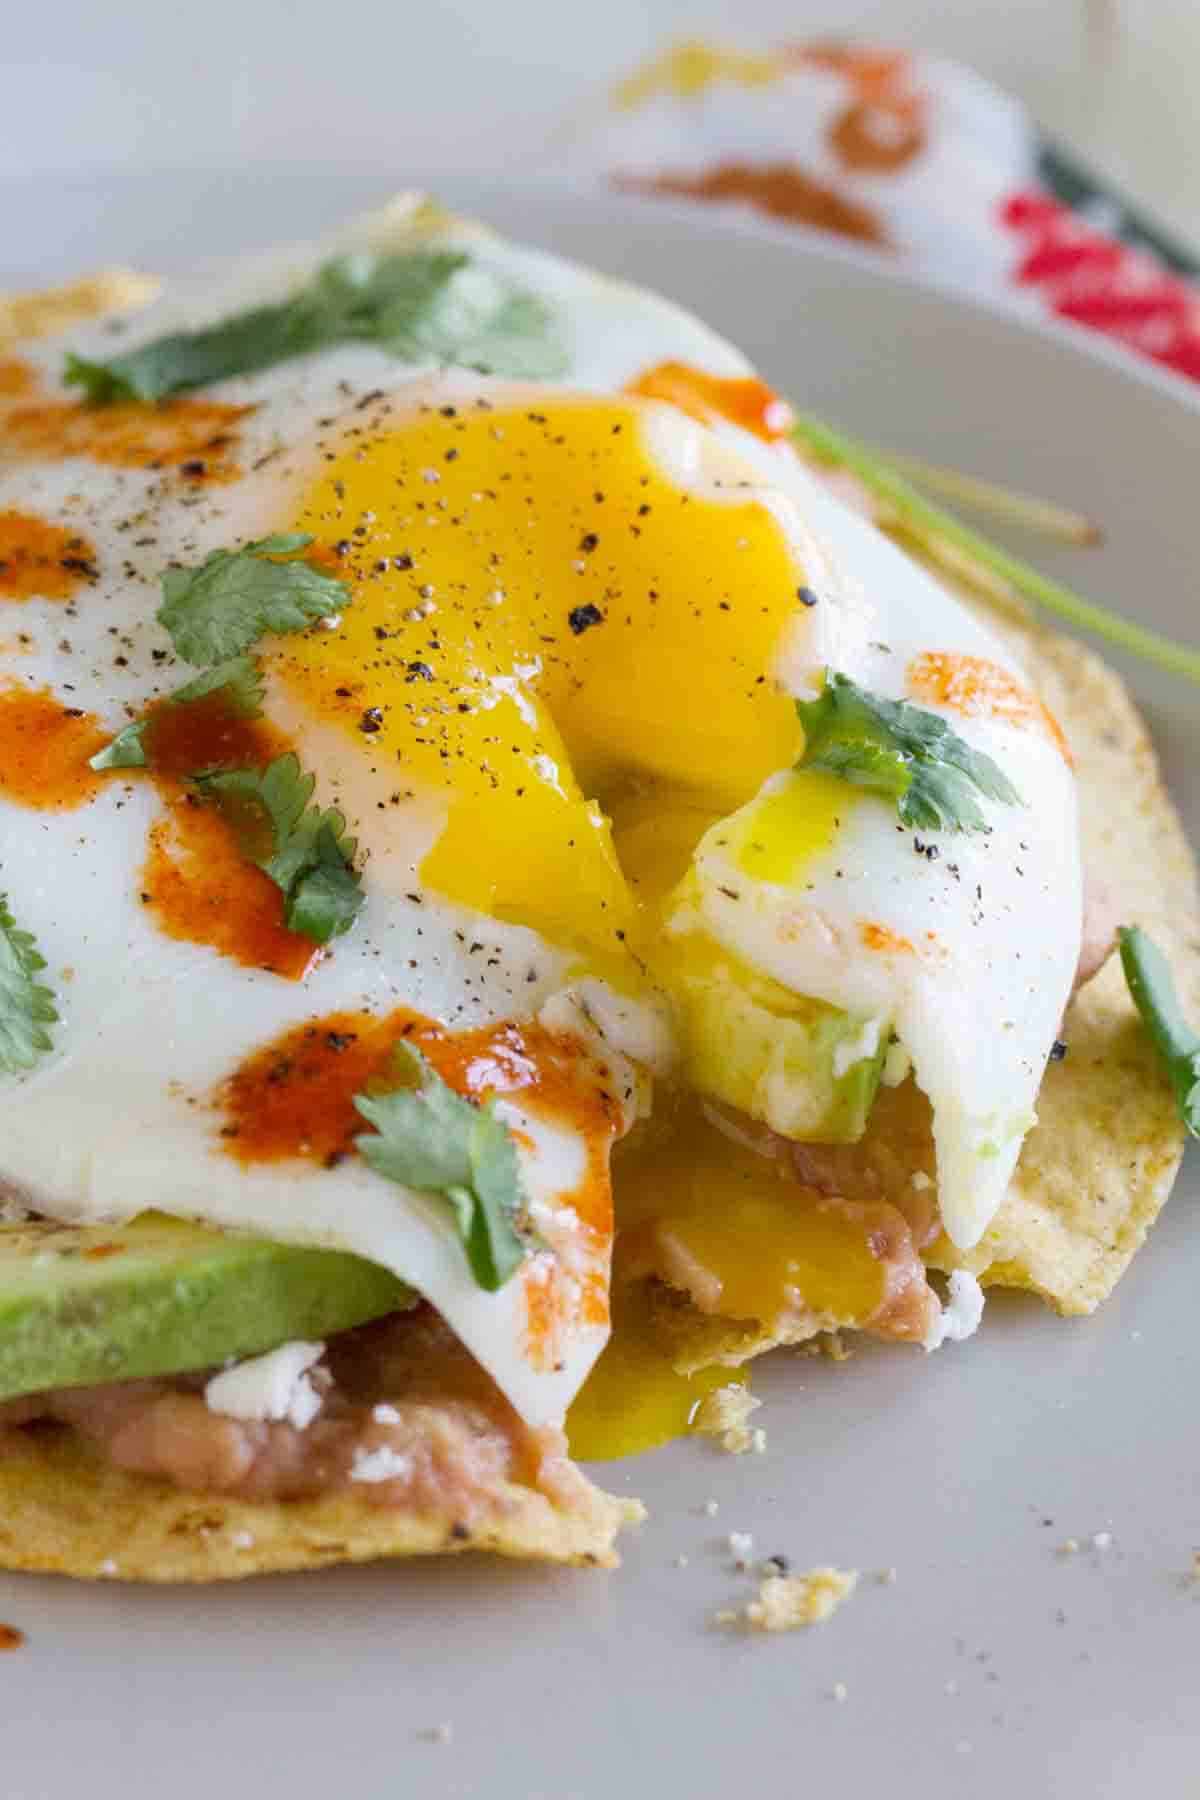 Breakfast Tostada with a bite taken from it to show egg dripping down.